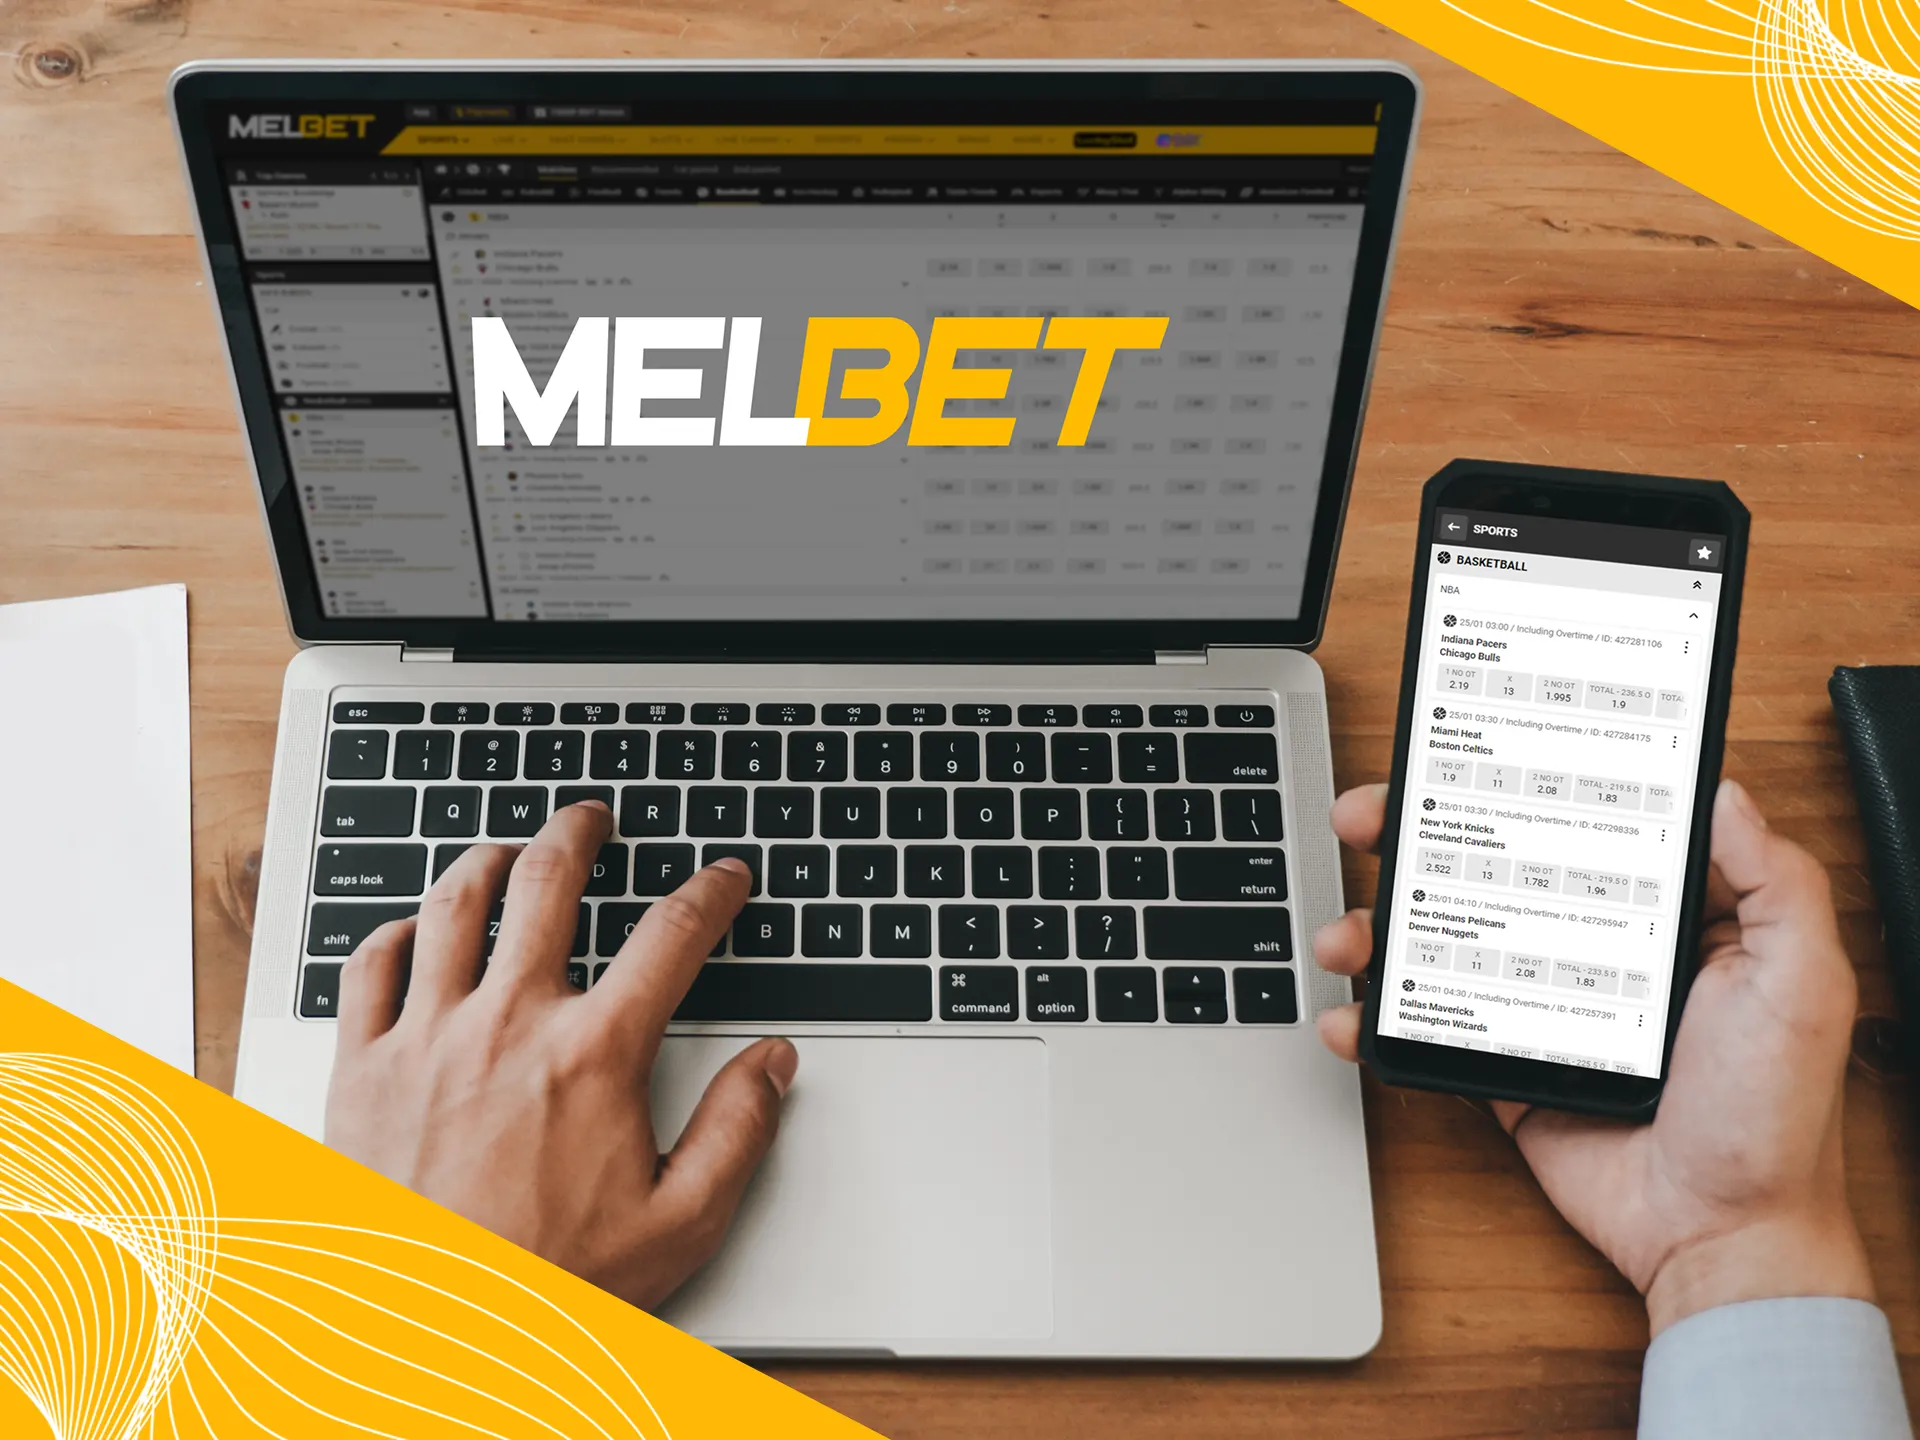 Make your bets surely with Melbet.